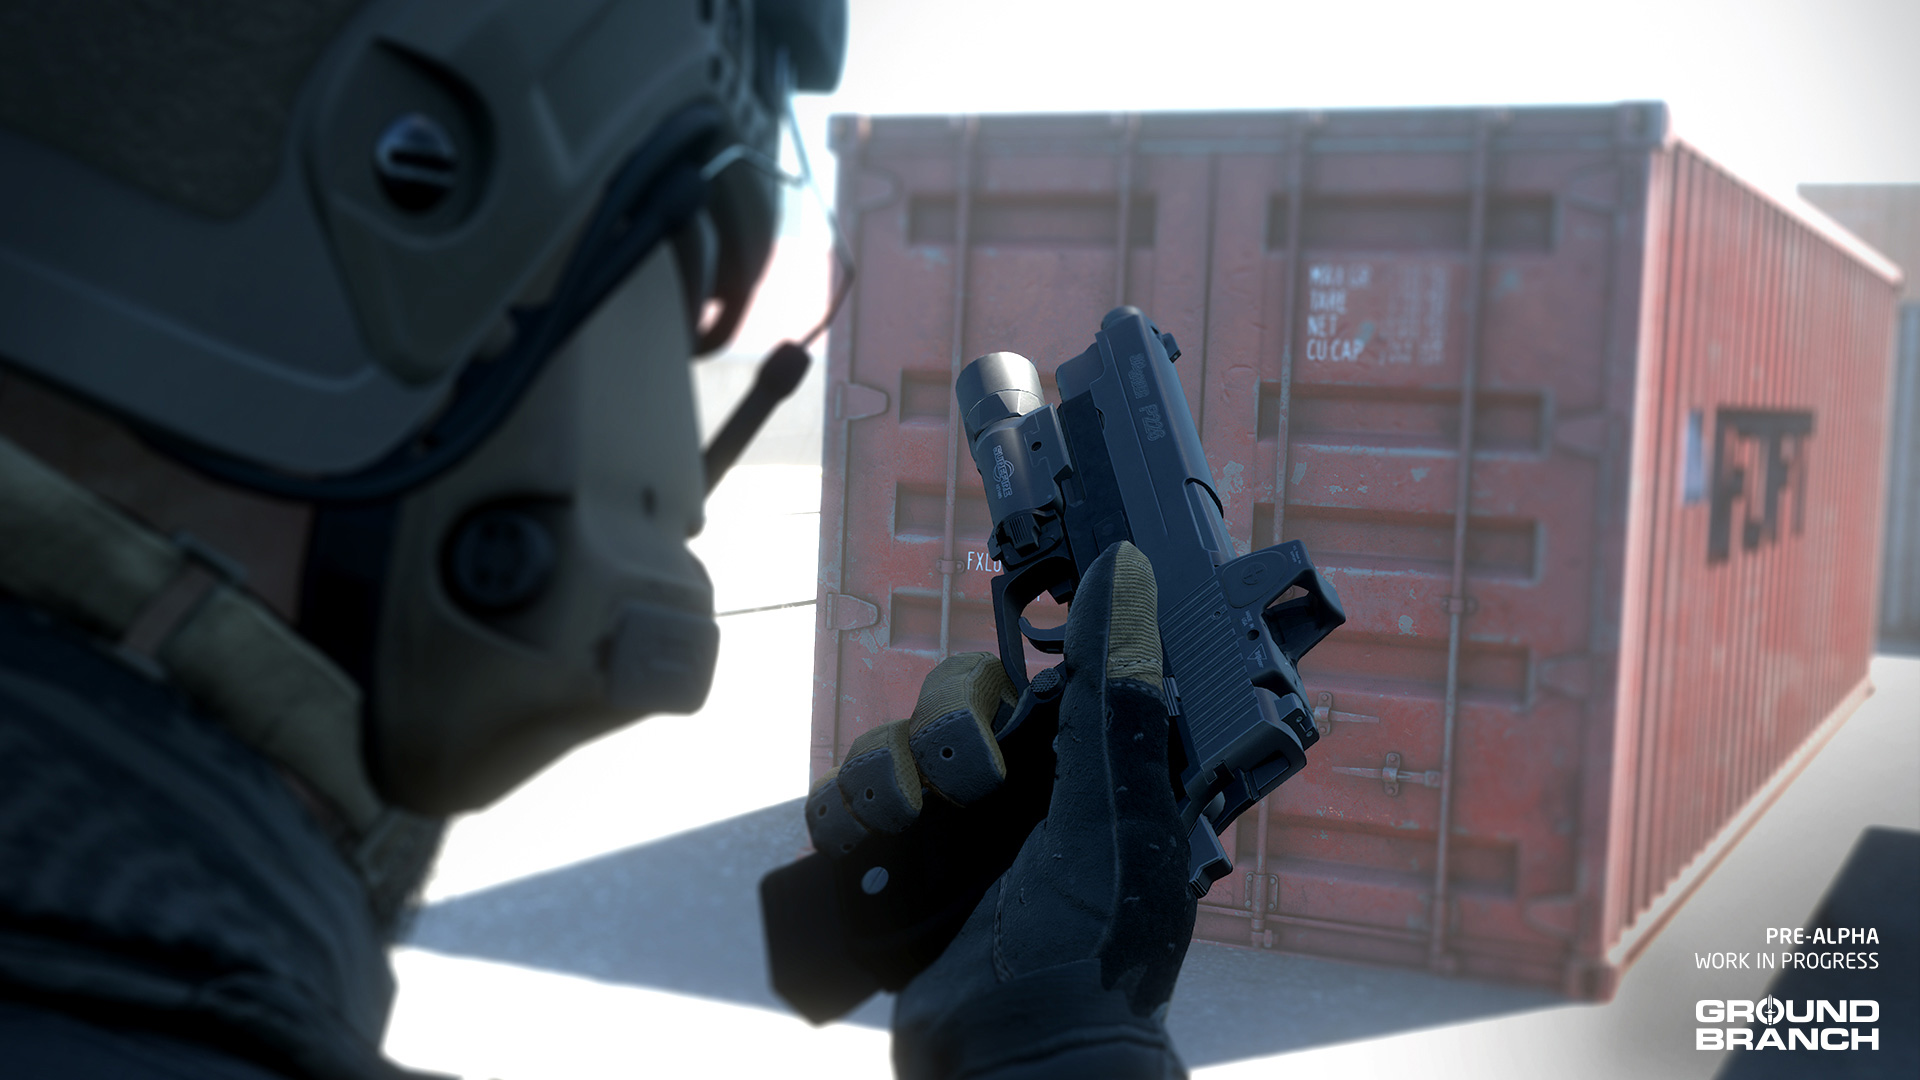 NEW Phantom Forces Features - KEYBINDING + New FOV Cap